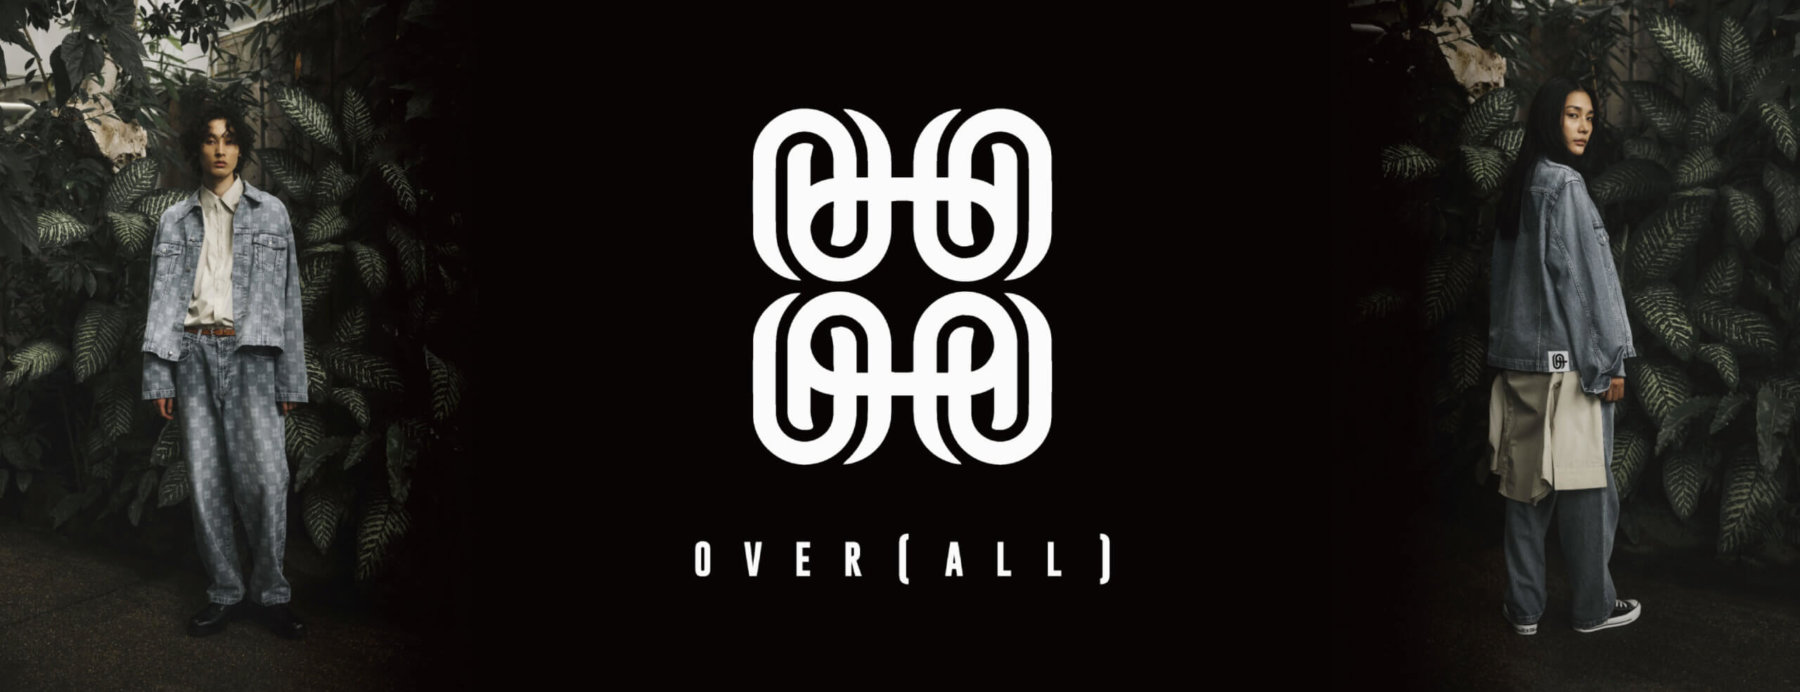 OVER(ALL) - The official website of 